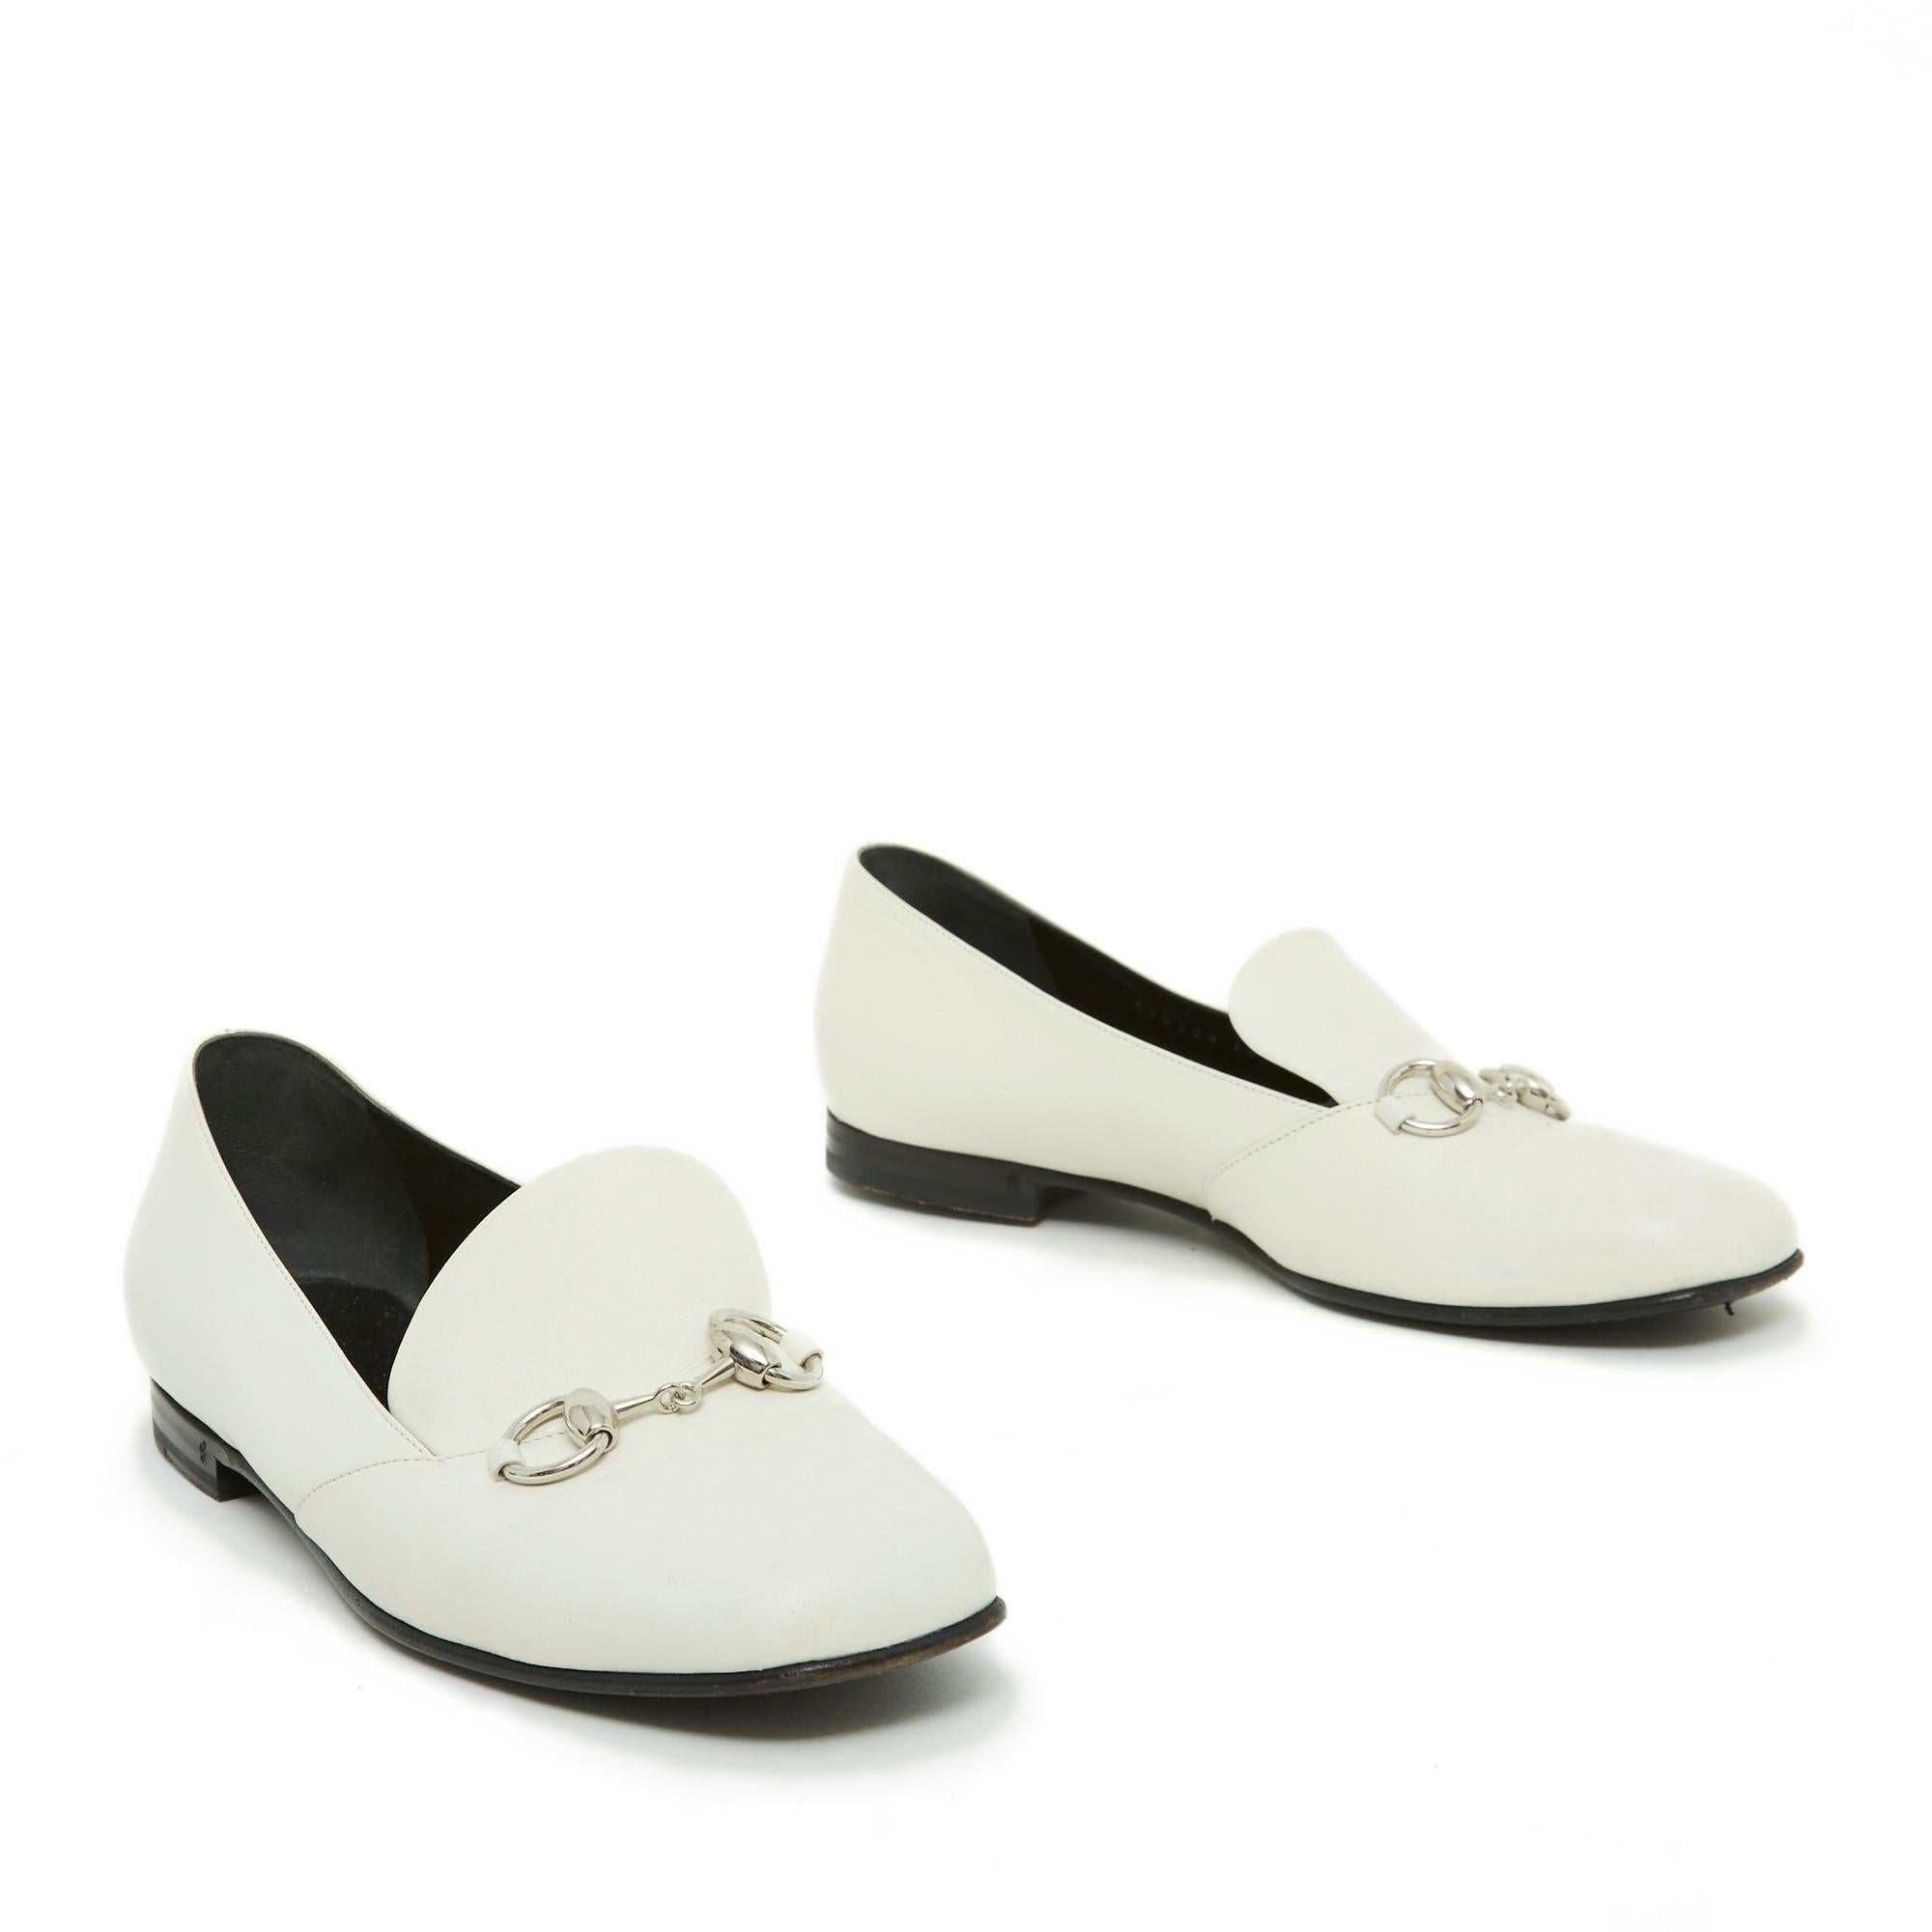 Gucci Horsebit Flats EU38 White Leather Loafers US7.5 In Excellent Condition For Sale In PARIS, FR